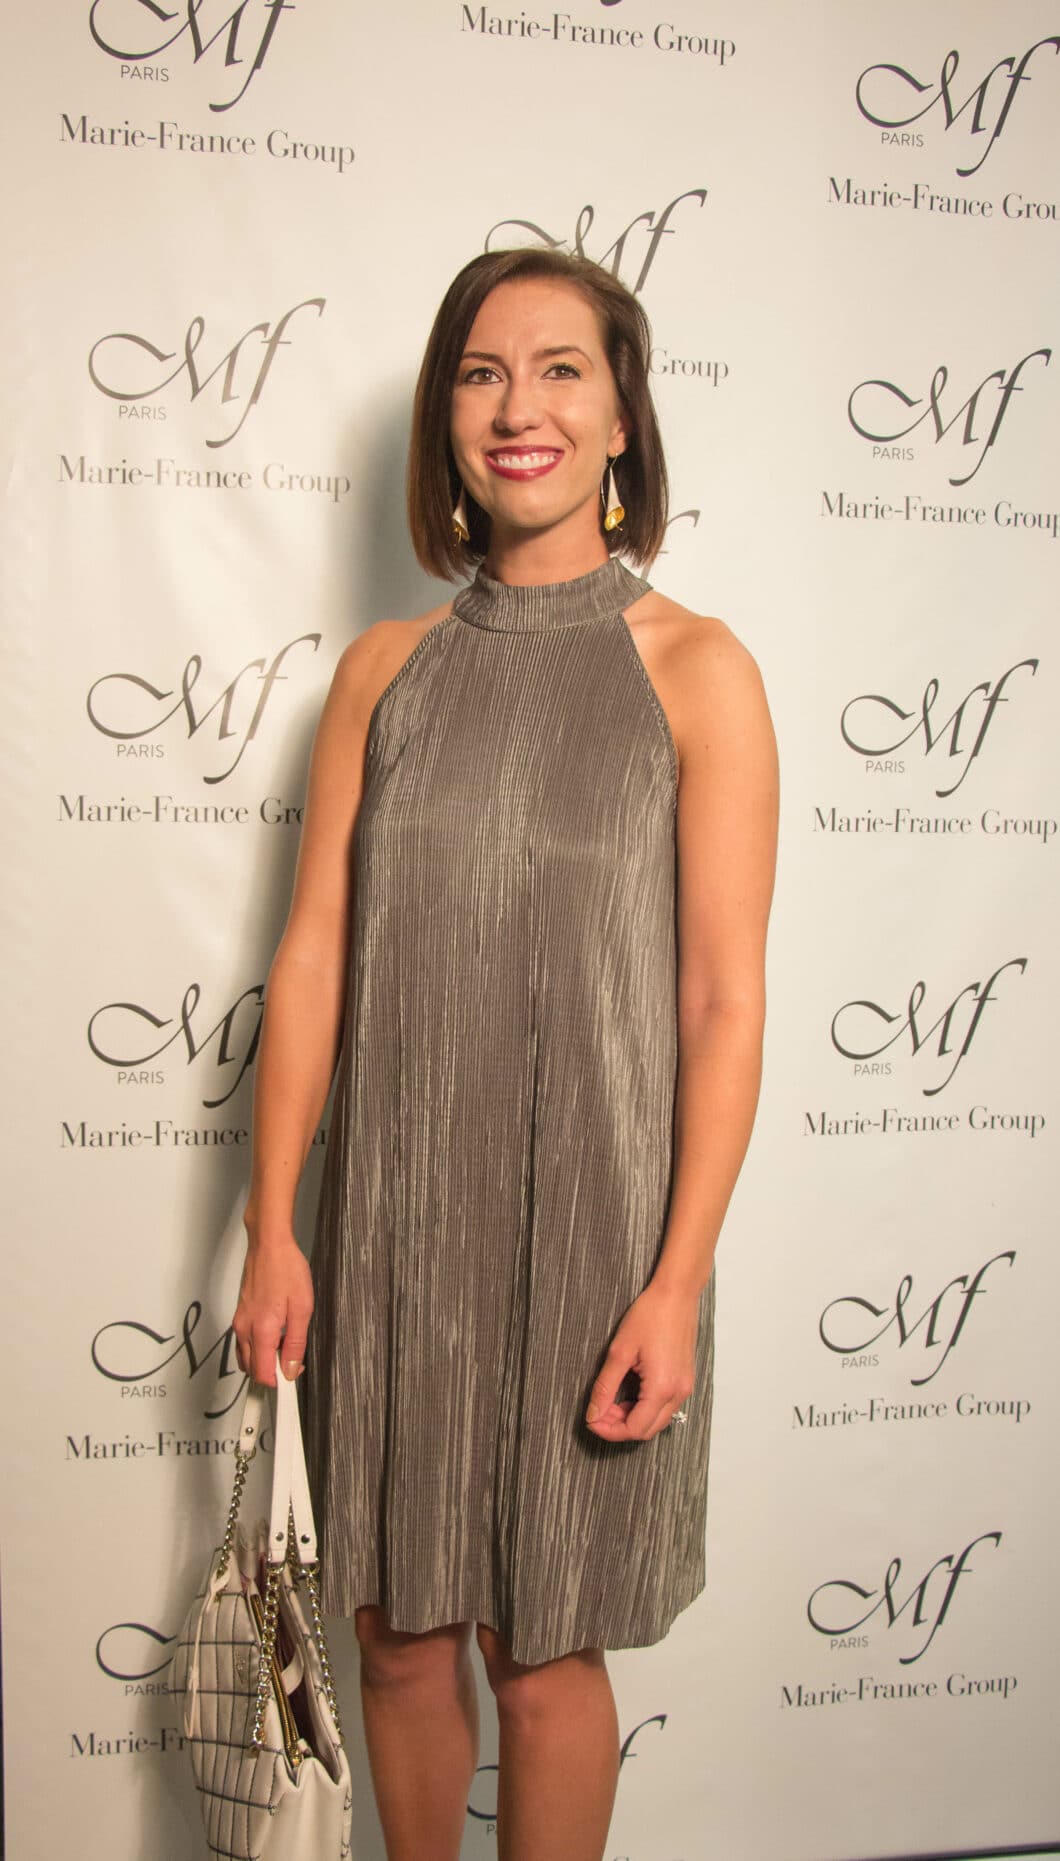 What I Wore for the Marie-France Group VIP Party & Runway Show